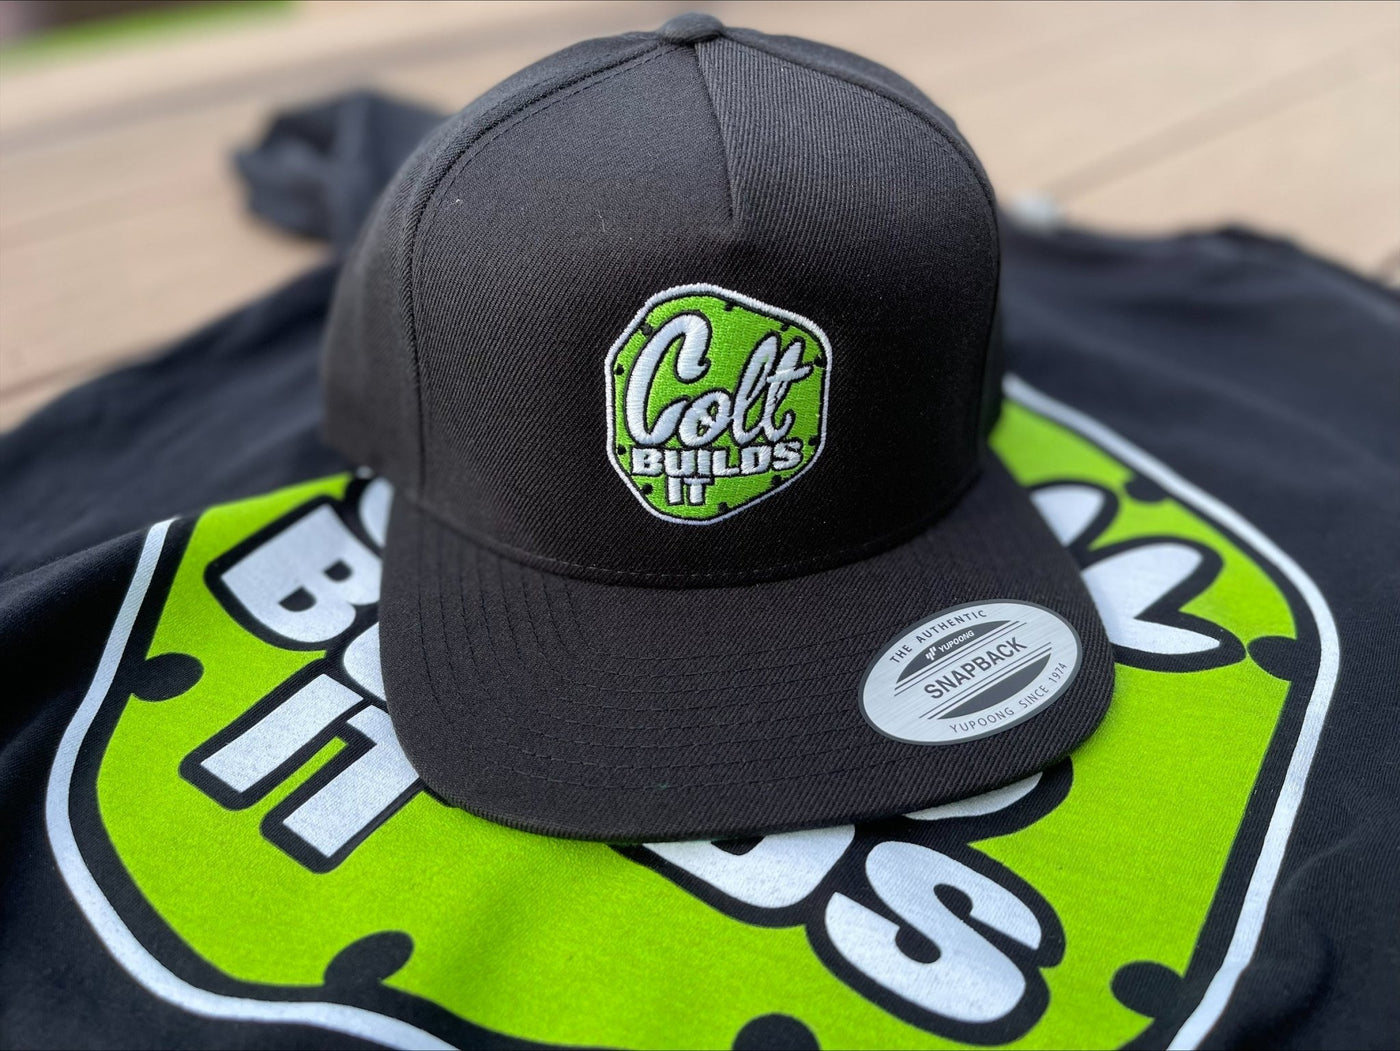 Colt Builds It Embroidered Hat - Goats Trail Off-Road Apparel Company